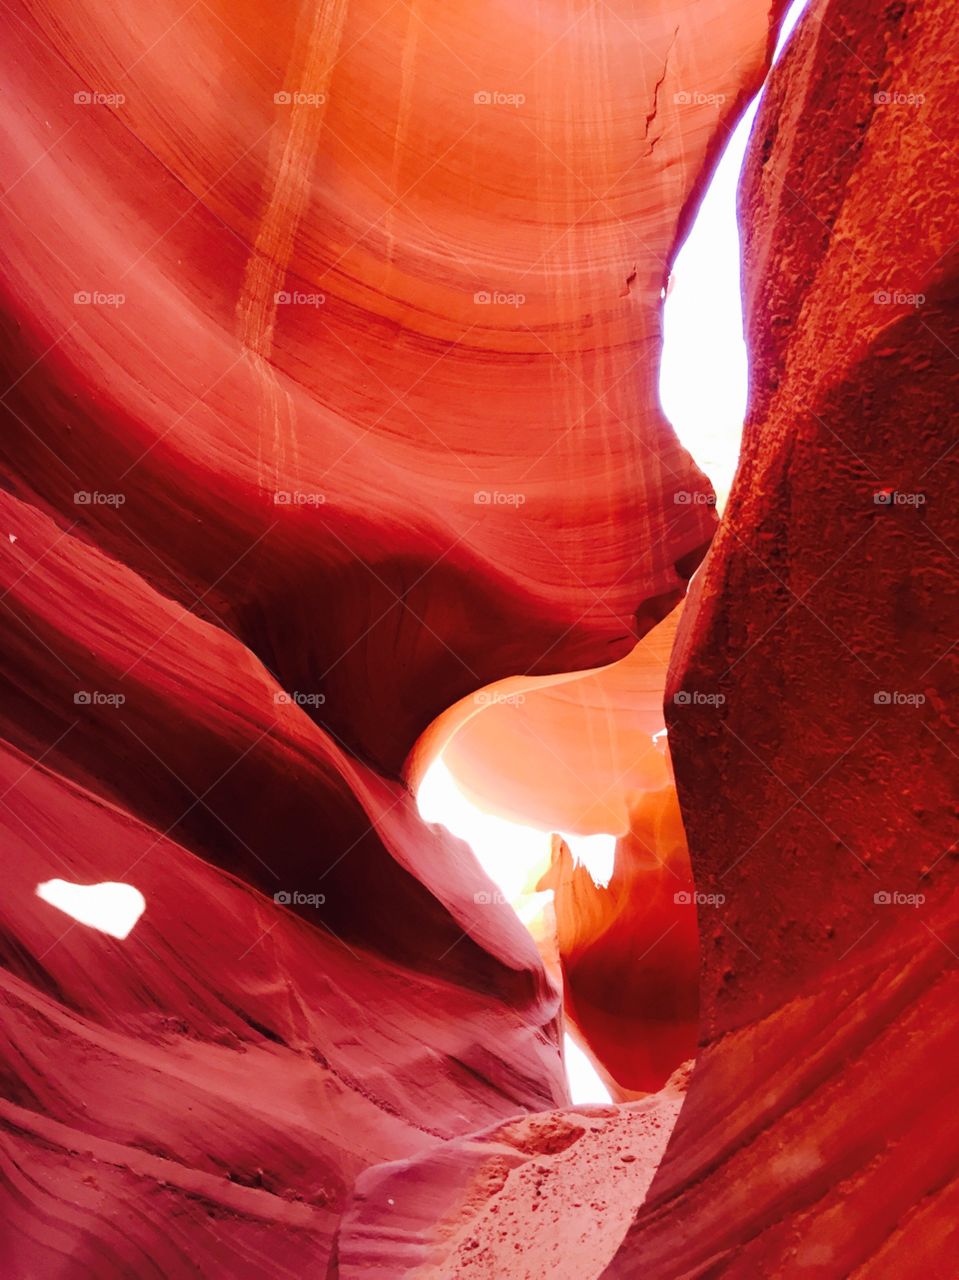 Heart in Antelope Canyon. Caught the shape of a heart from the sunlight coming in the canyon.